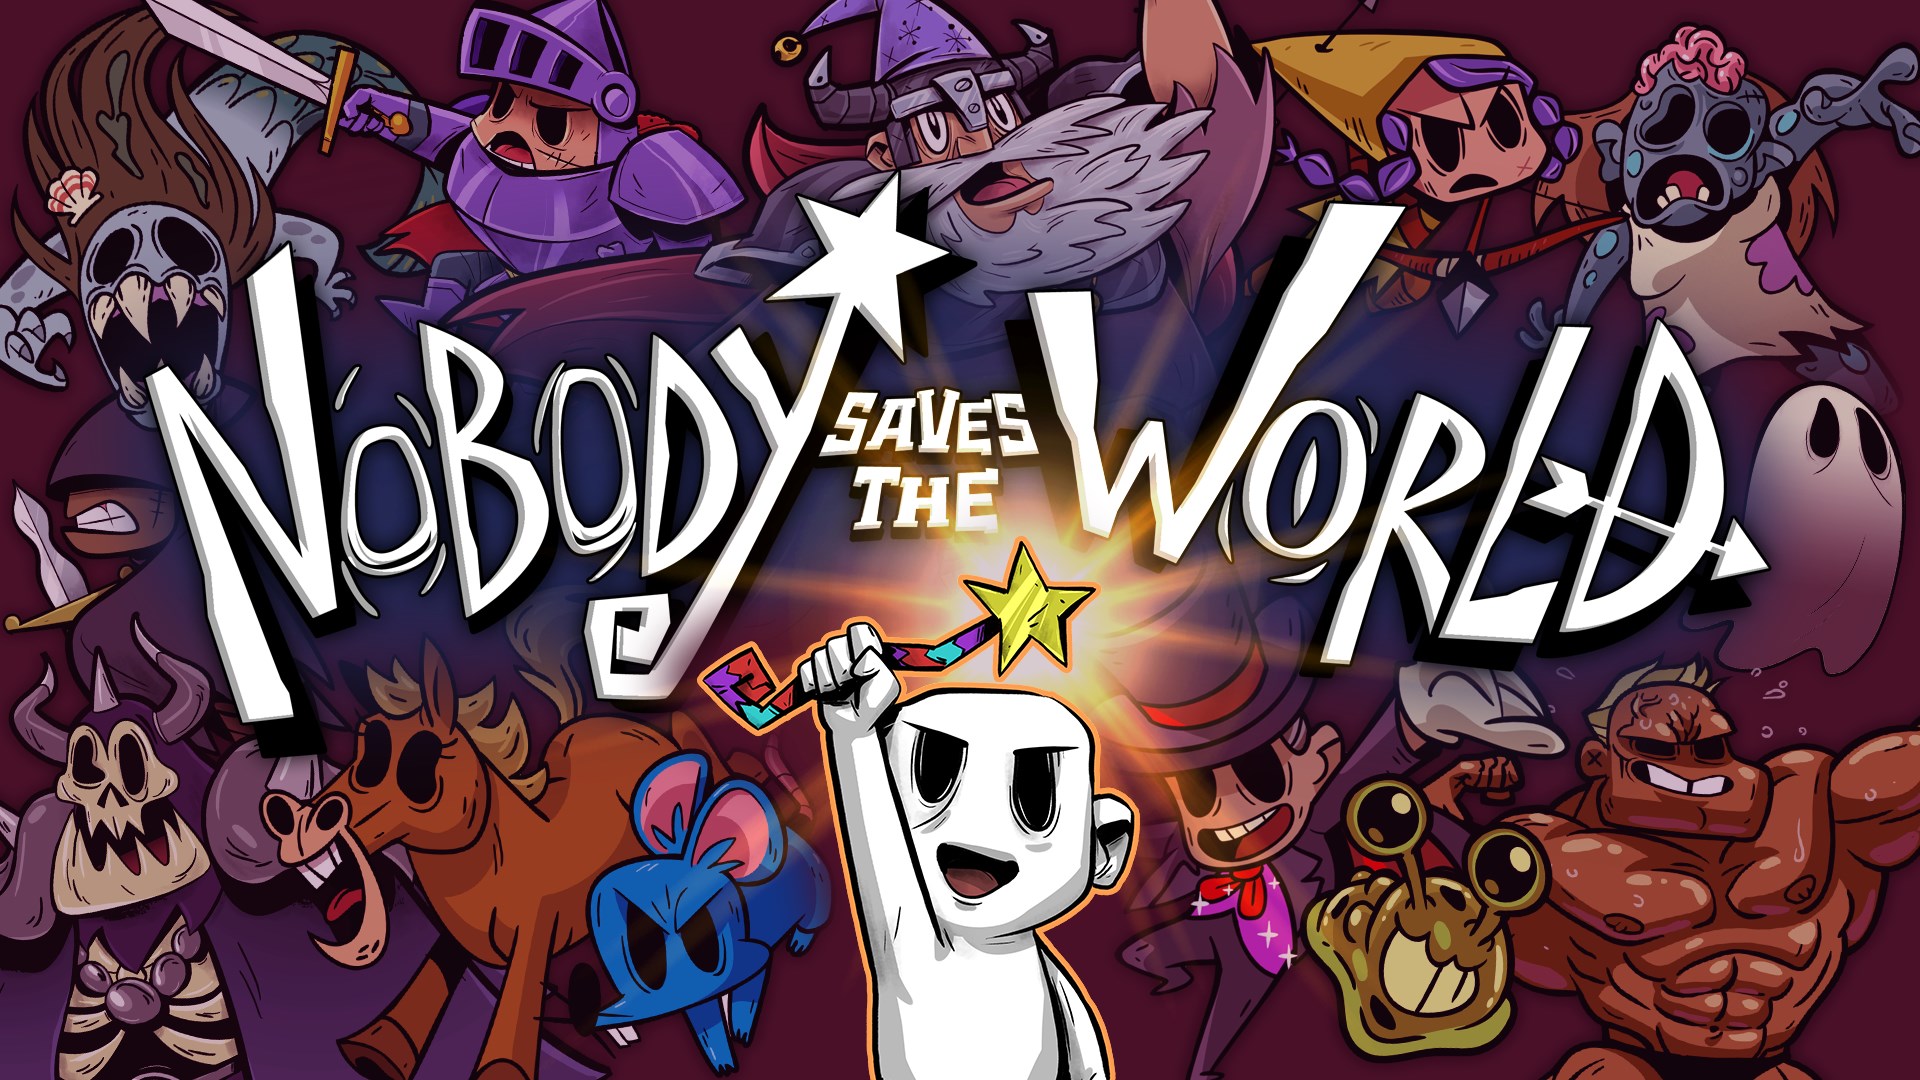 Nobody Saves The World Is Now Available For PC, Xbox One, And Xbox
Series X|S (Game Pass)